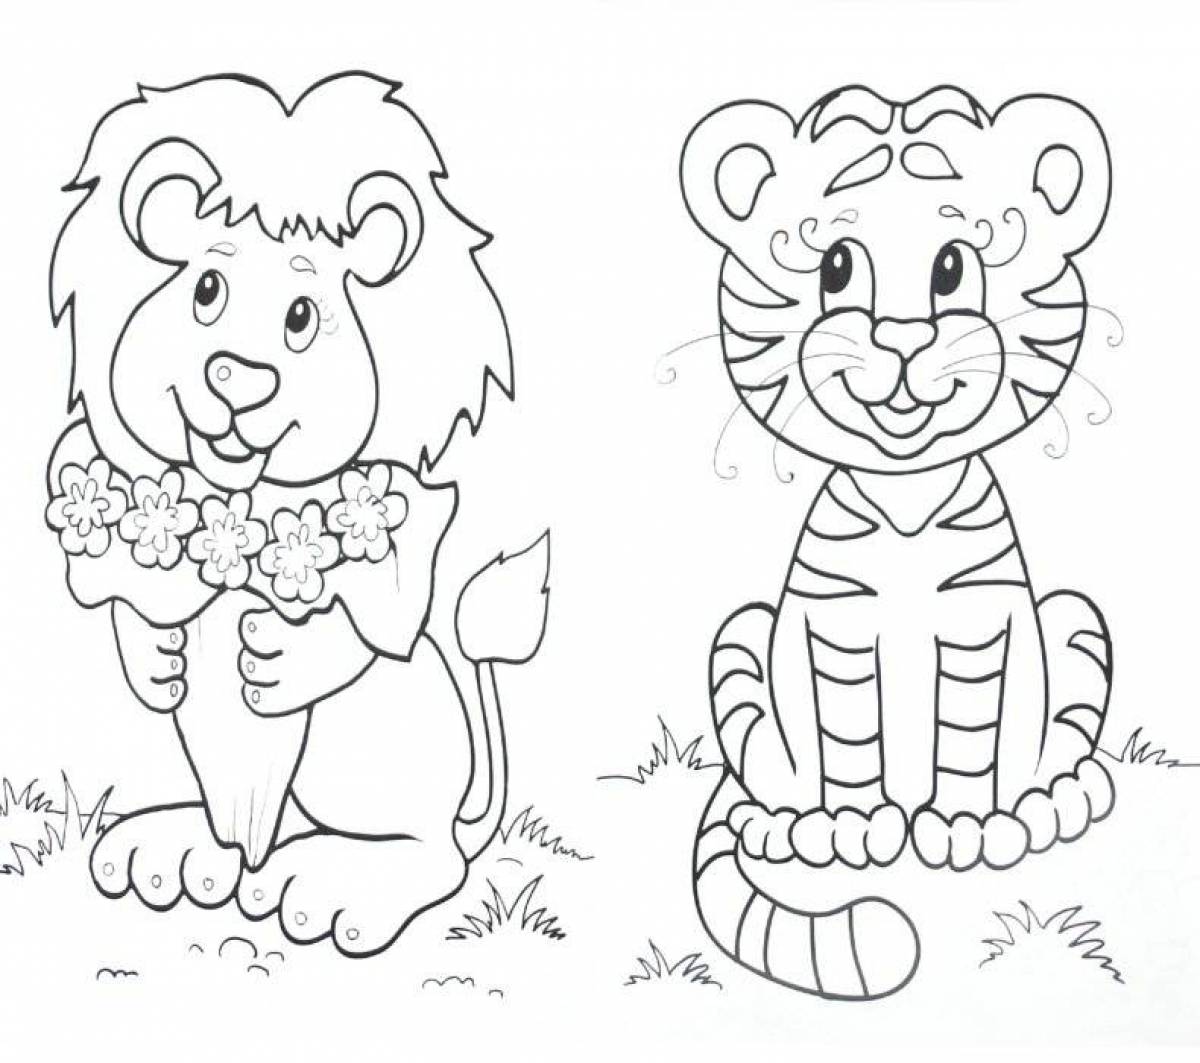 Fun coloring pages animals for children 6-7 years old